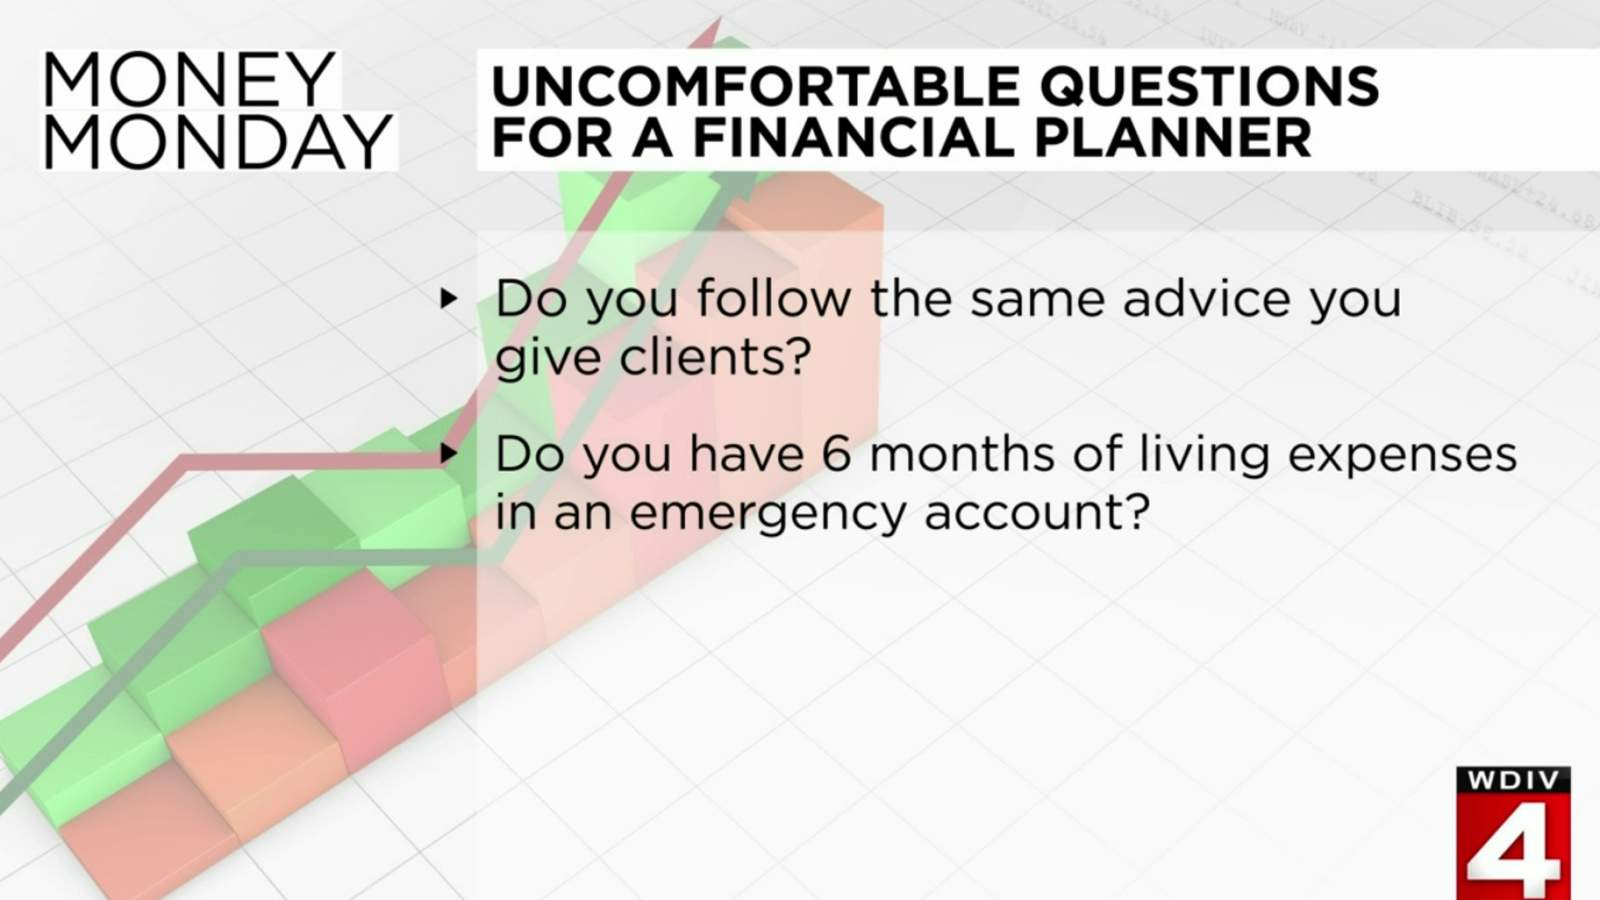 Money tips: Uncomfortable questions for a financial planner